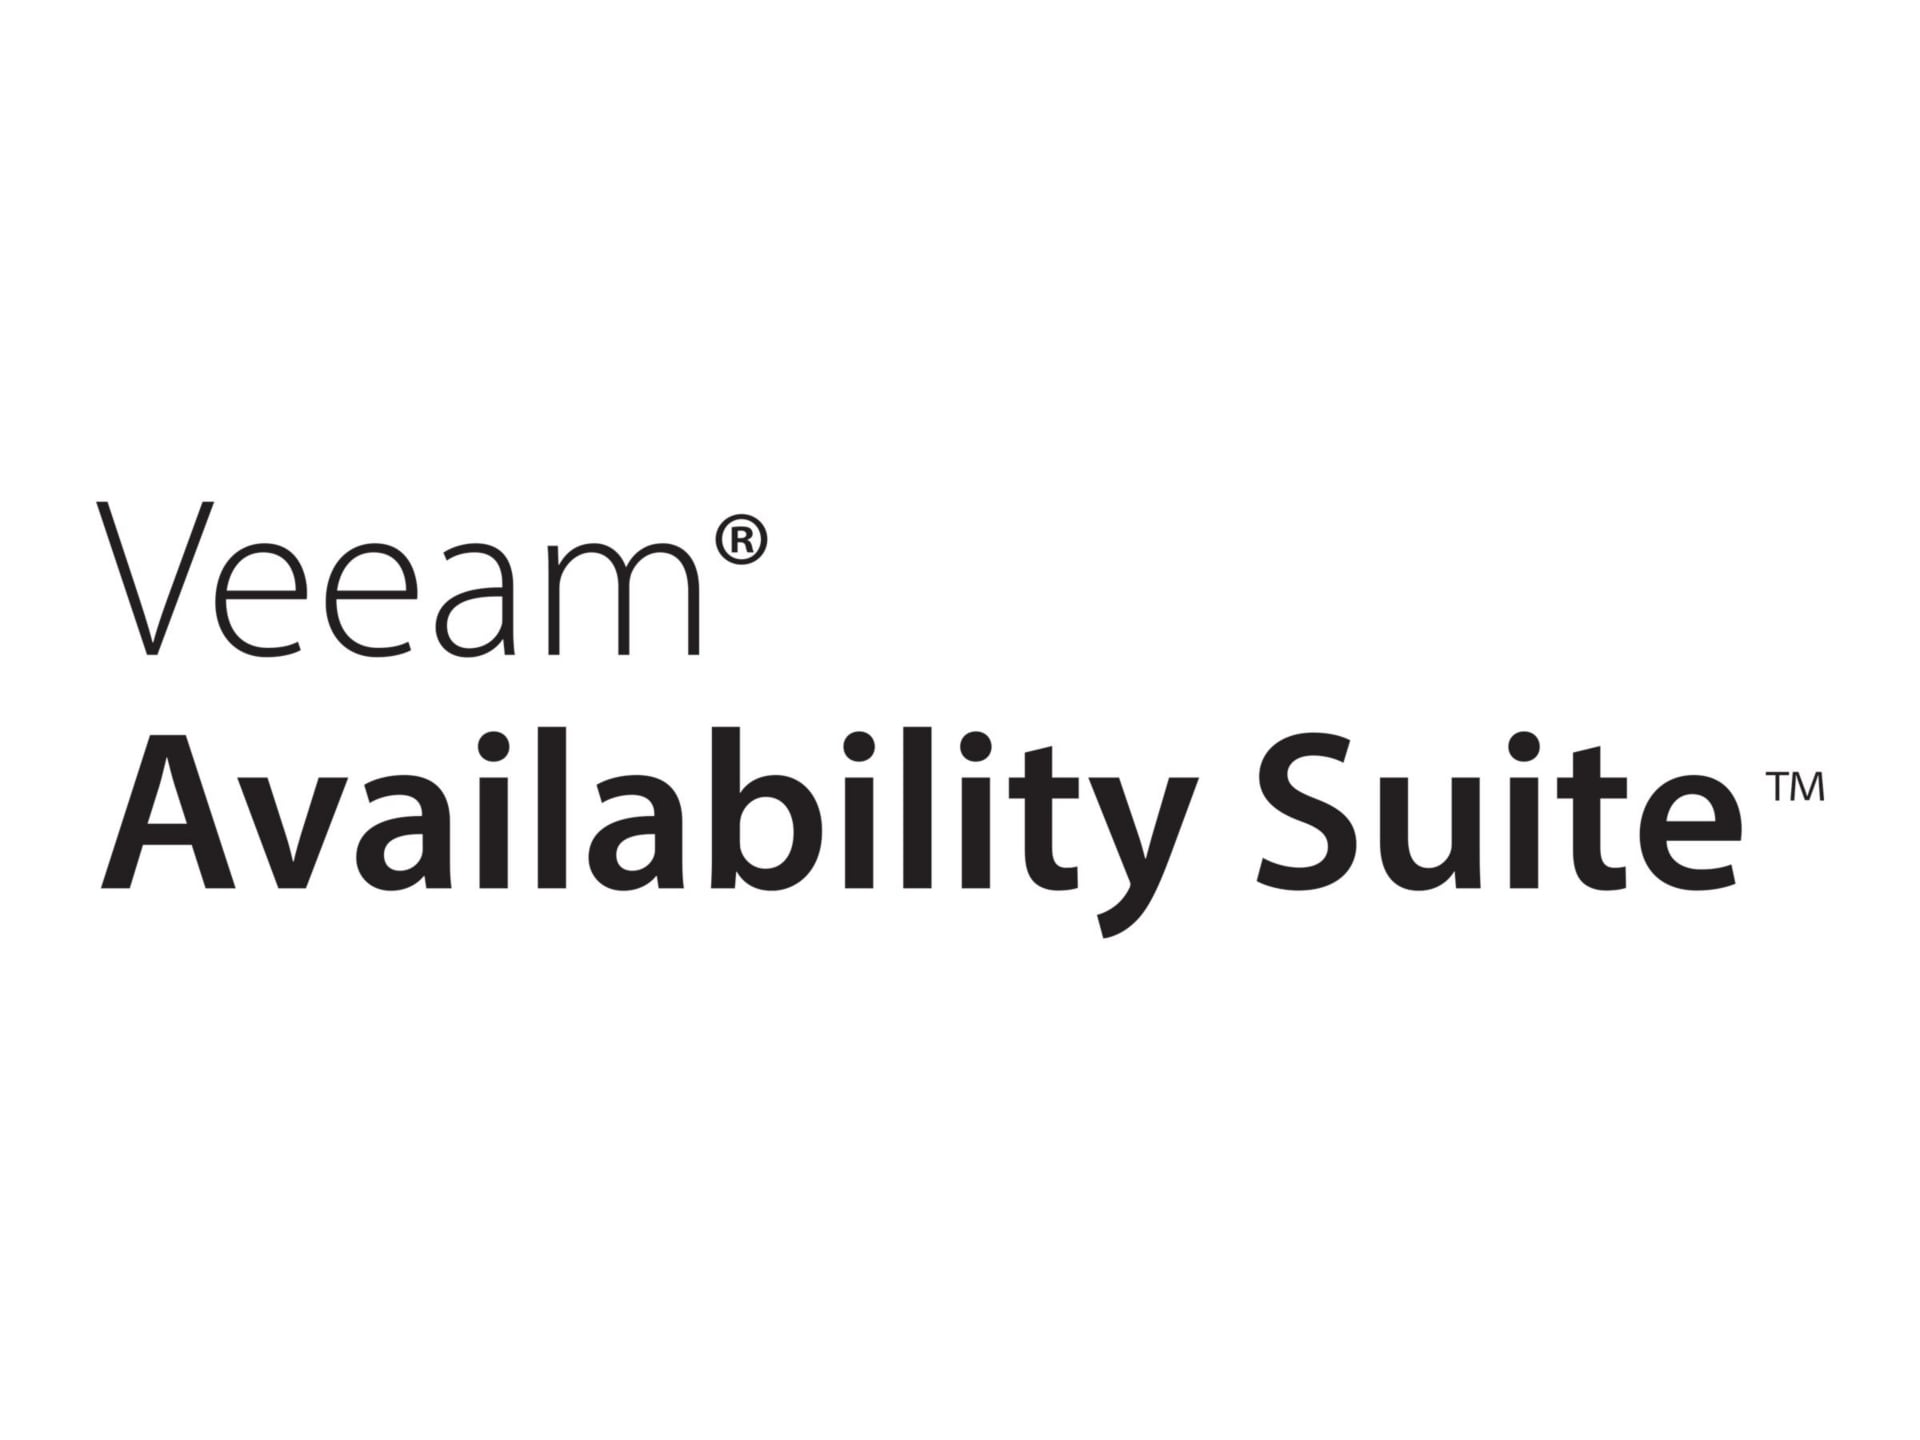 Veeam Availability Suite Universal License - Annual Billing License (renewal) (2nd year) + Production Support - 10